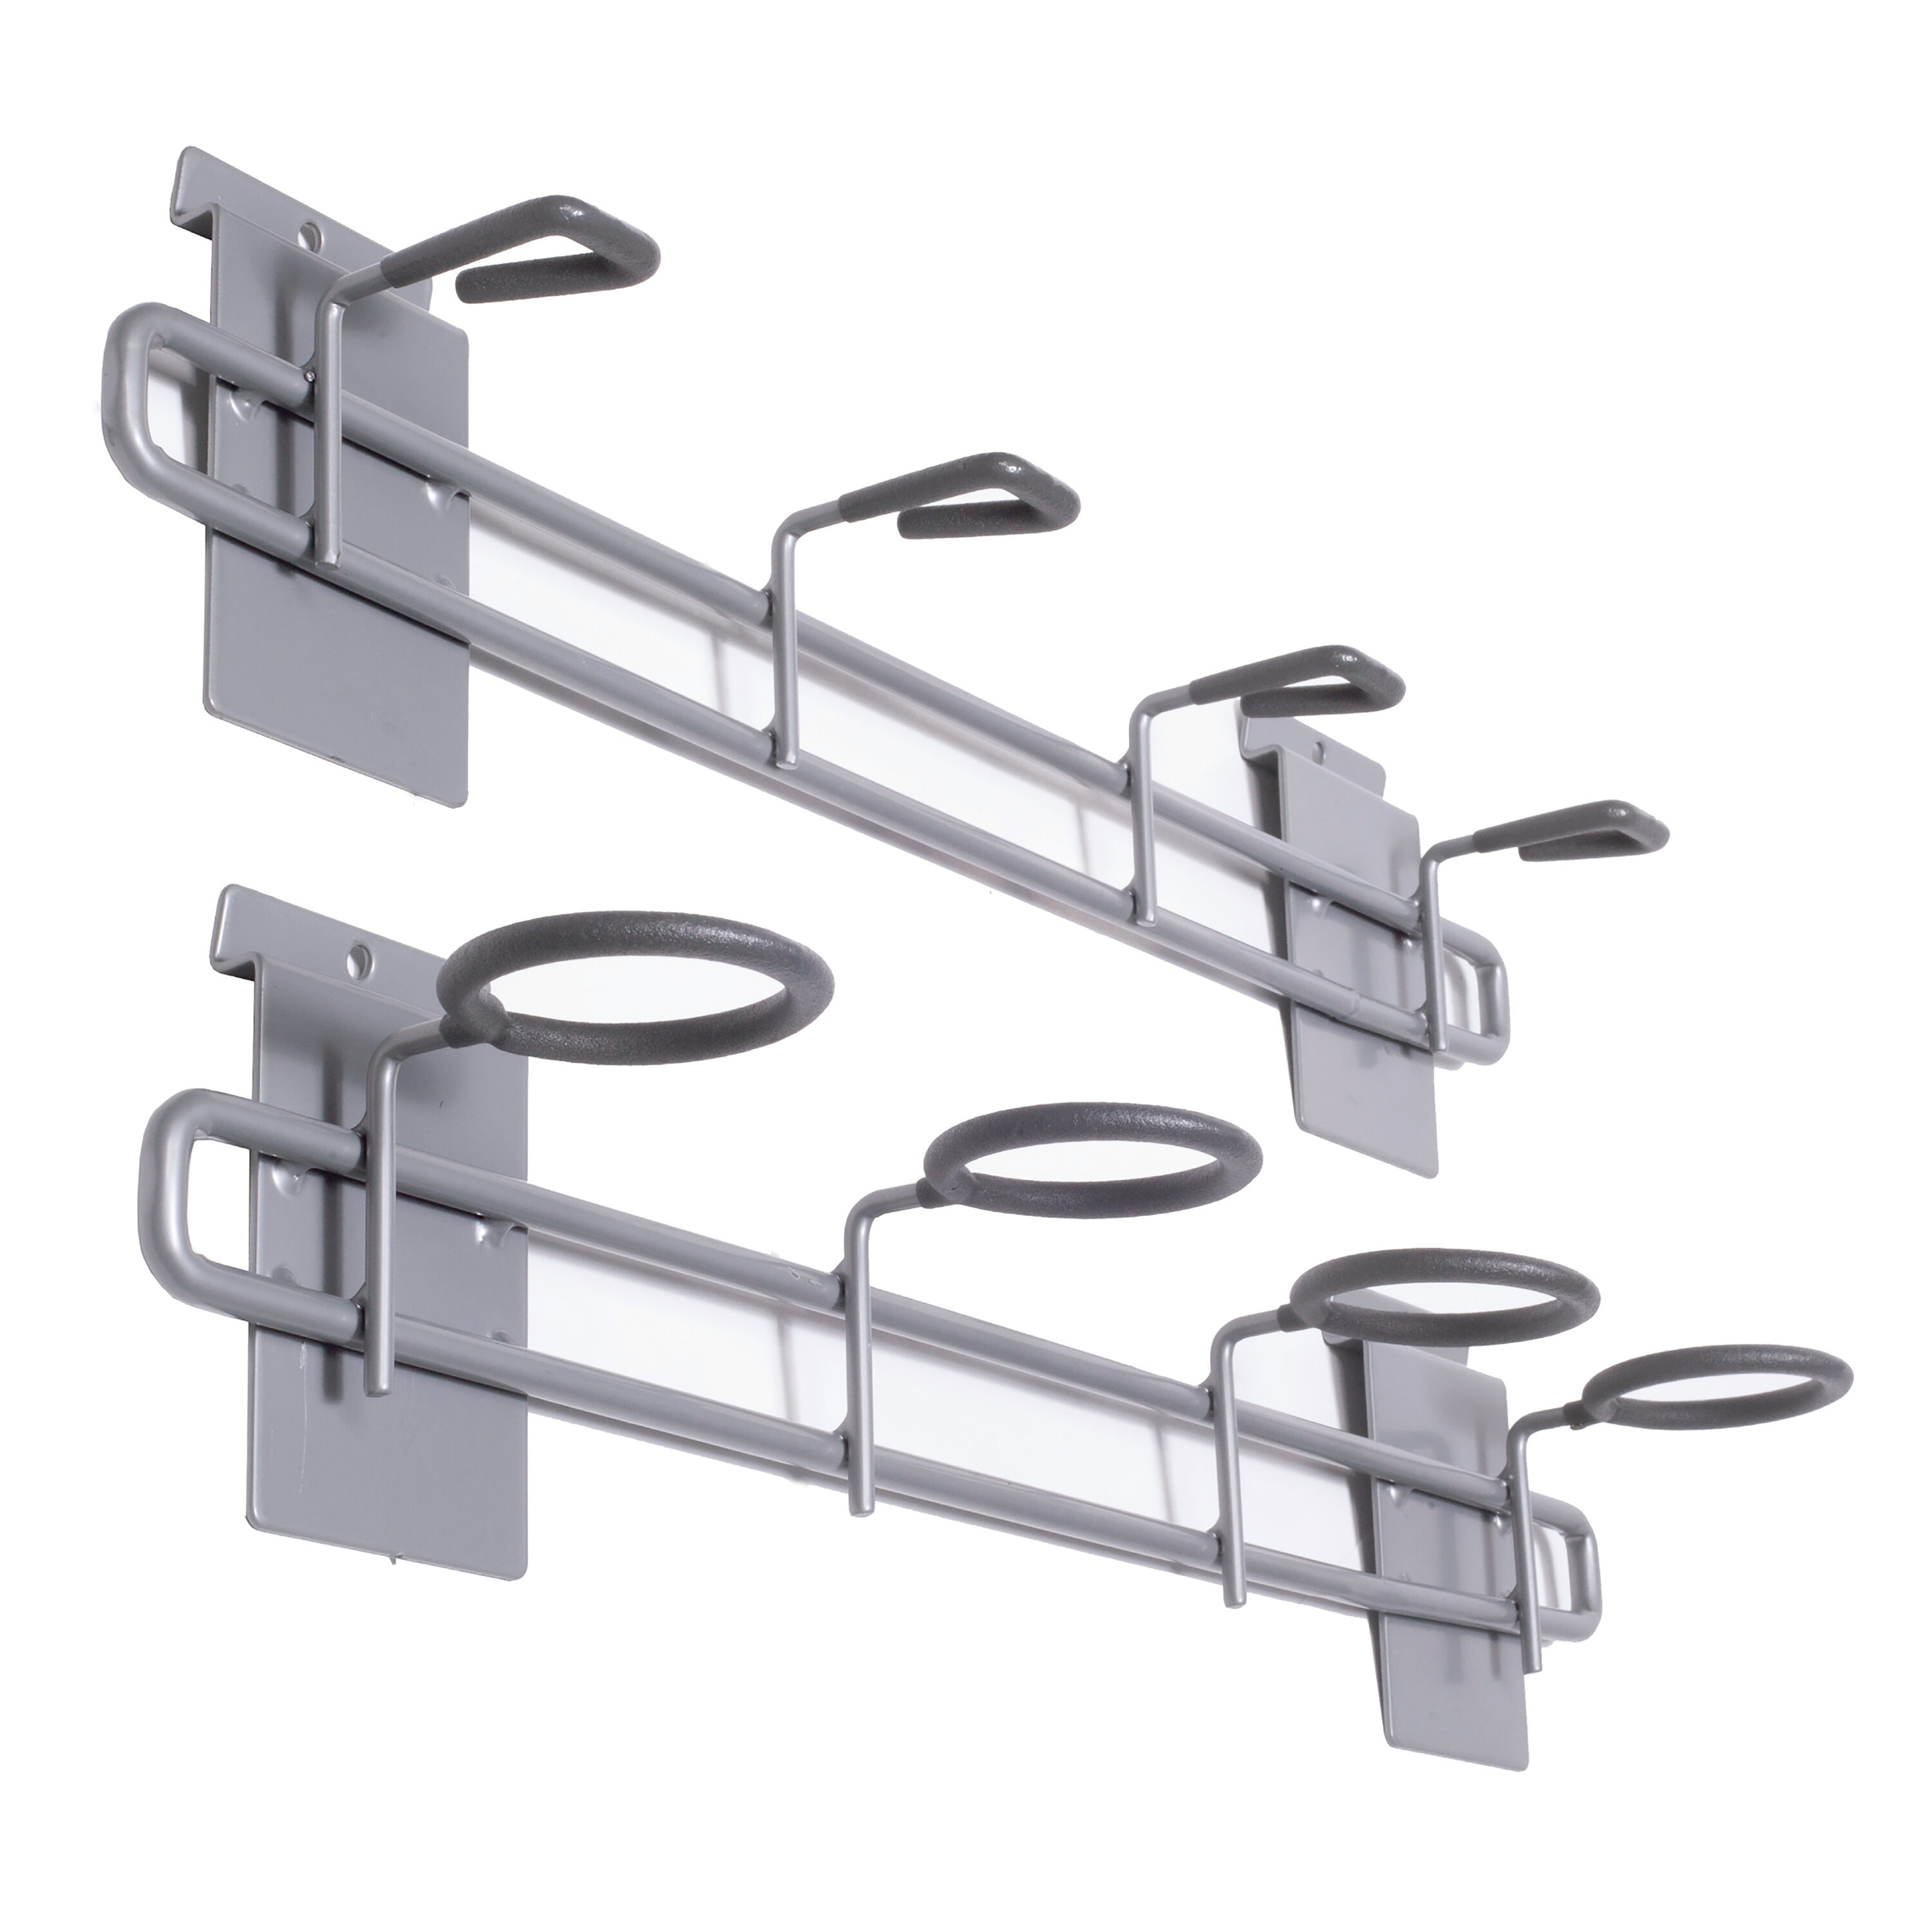 Rod Organizer A Pair 10 Rods Storage Pole Holders For Fishing Accessories  Ceiling Wall Mount, Garage Organizer From Sf37, $25.55